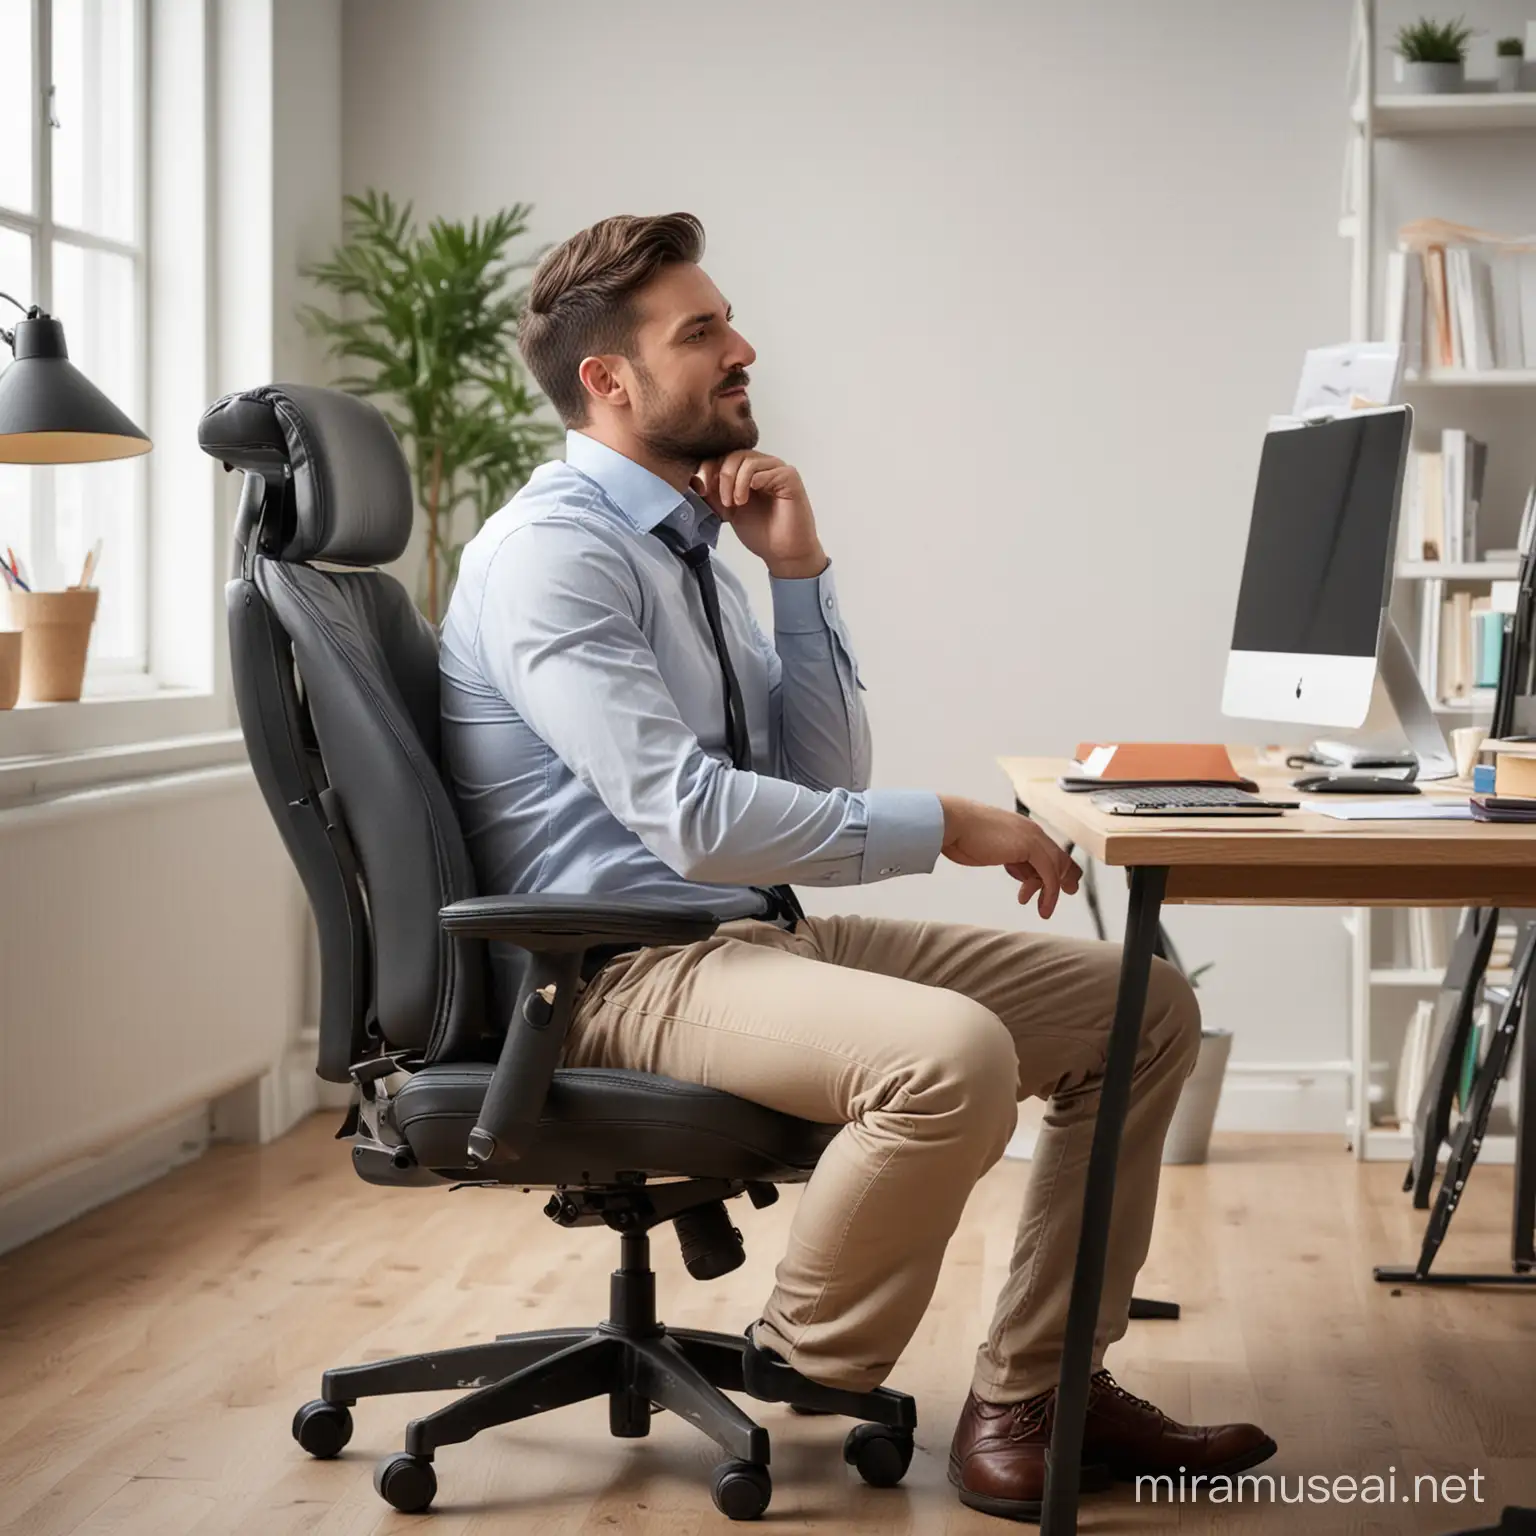 Designer Suffers from Painful Backside While Working in Office Chair